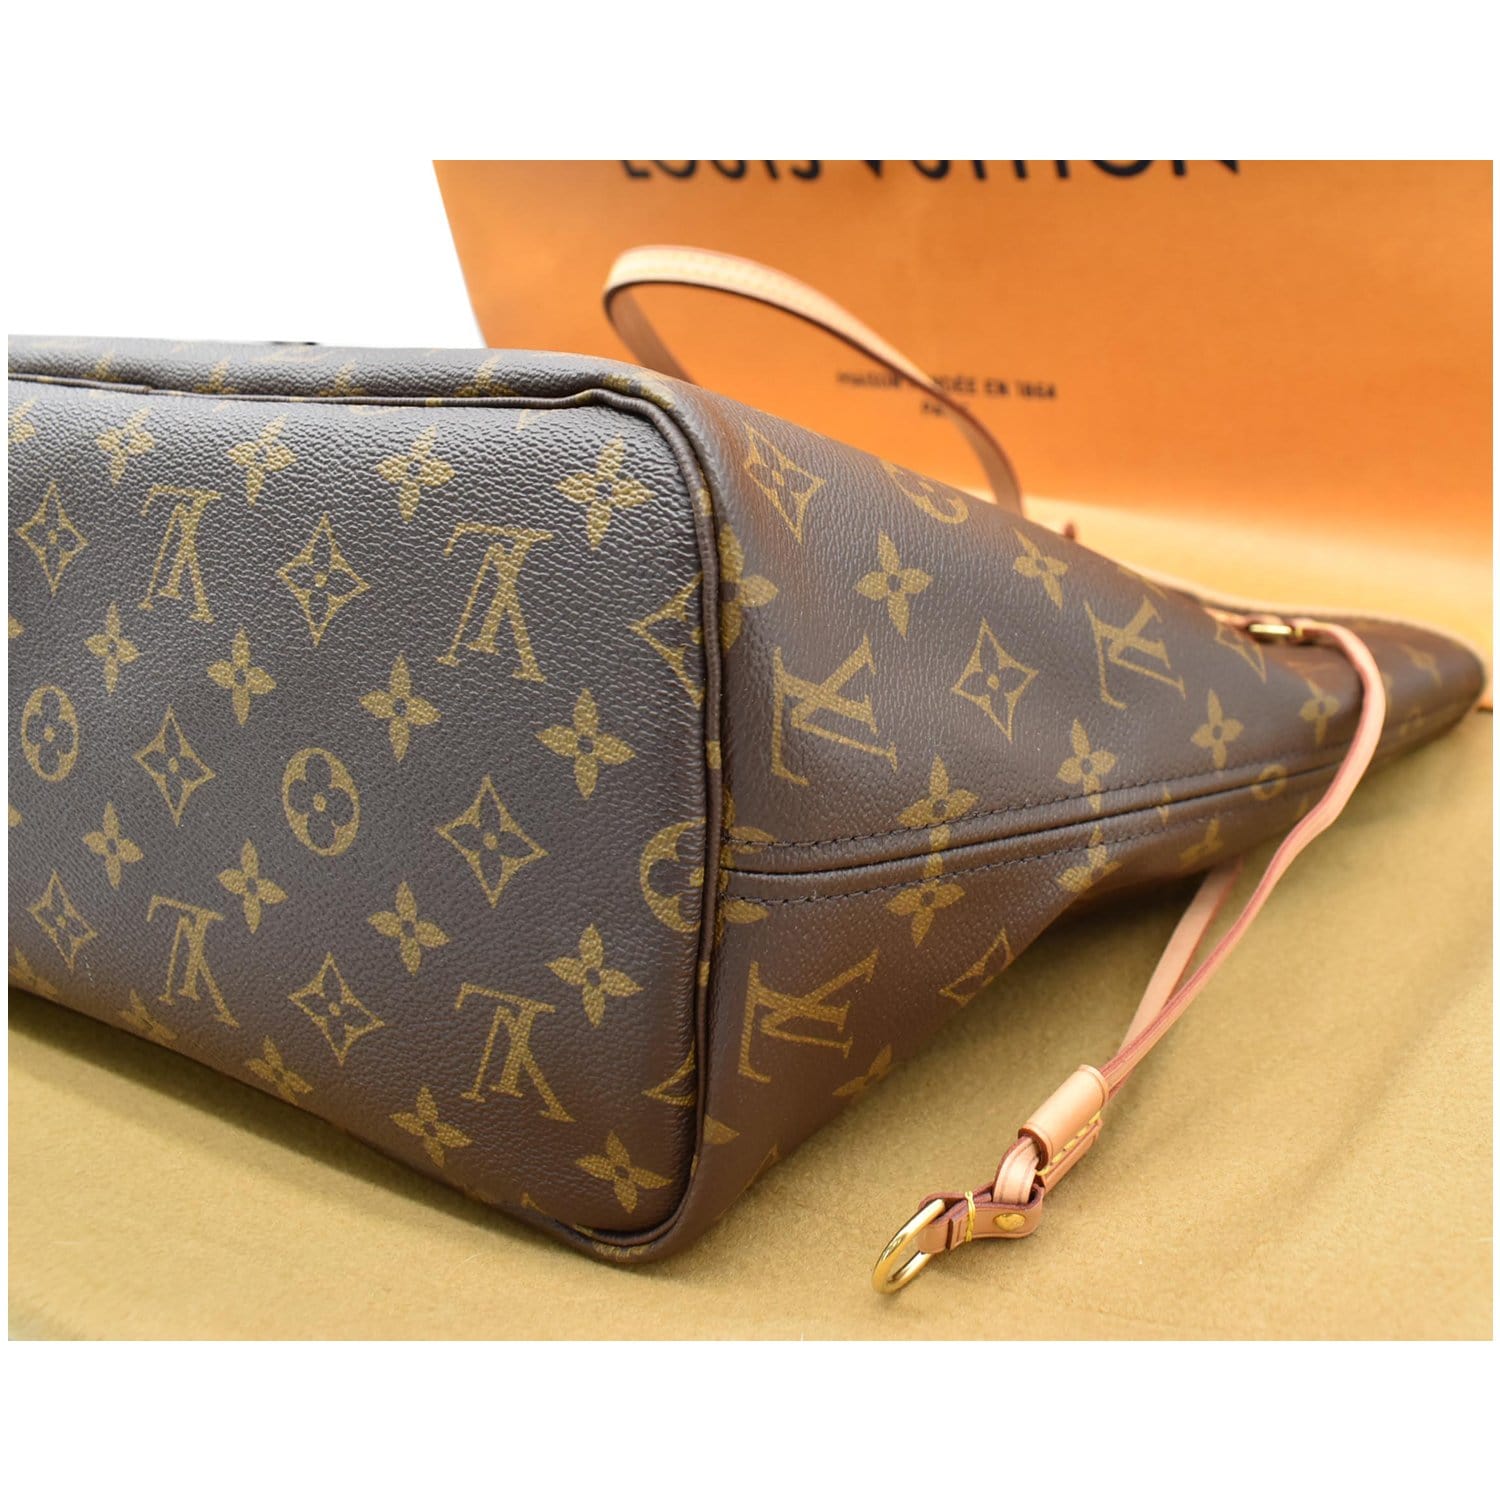 Louis Vuttion neverfull mm monogram in 2023  Louis vuitton bag neverfull, Louis  vuitton bag, Bags designer fashion